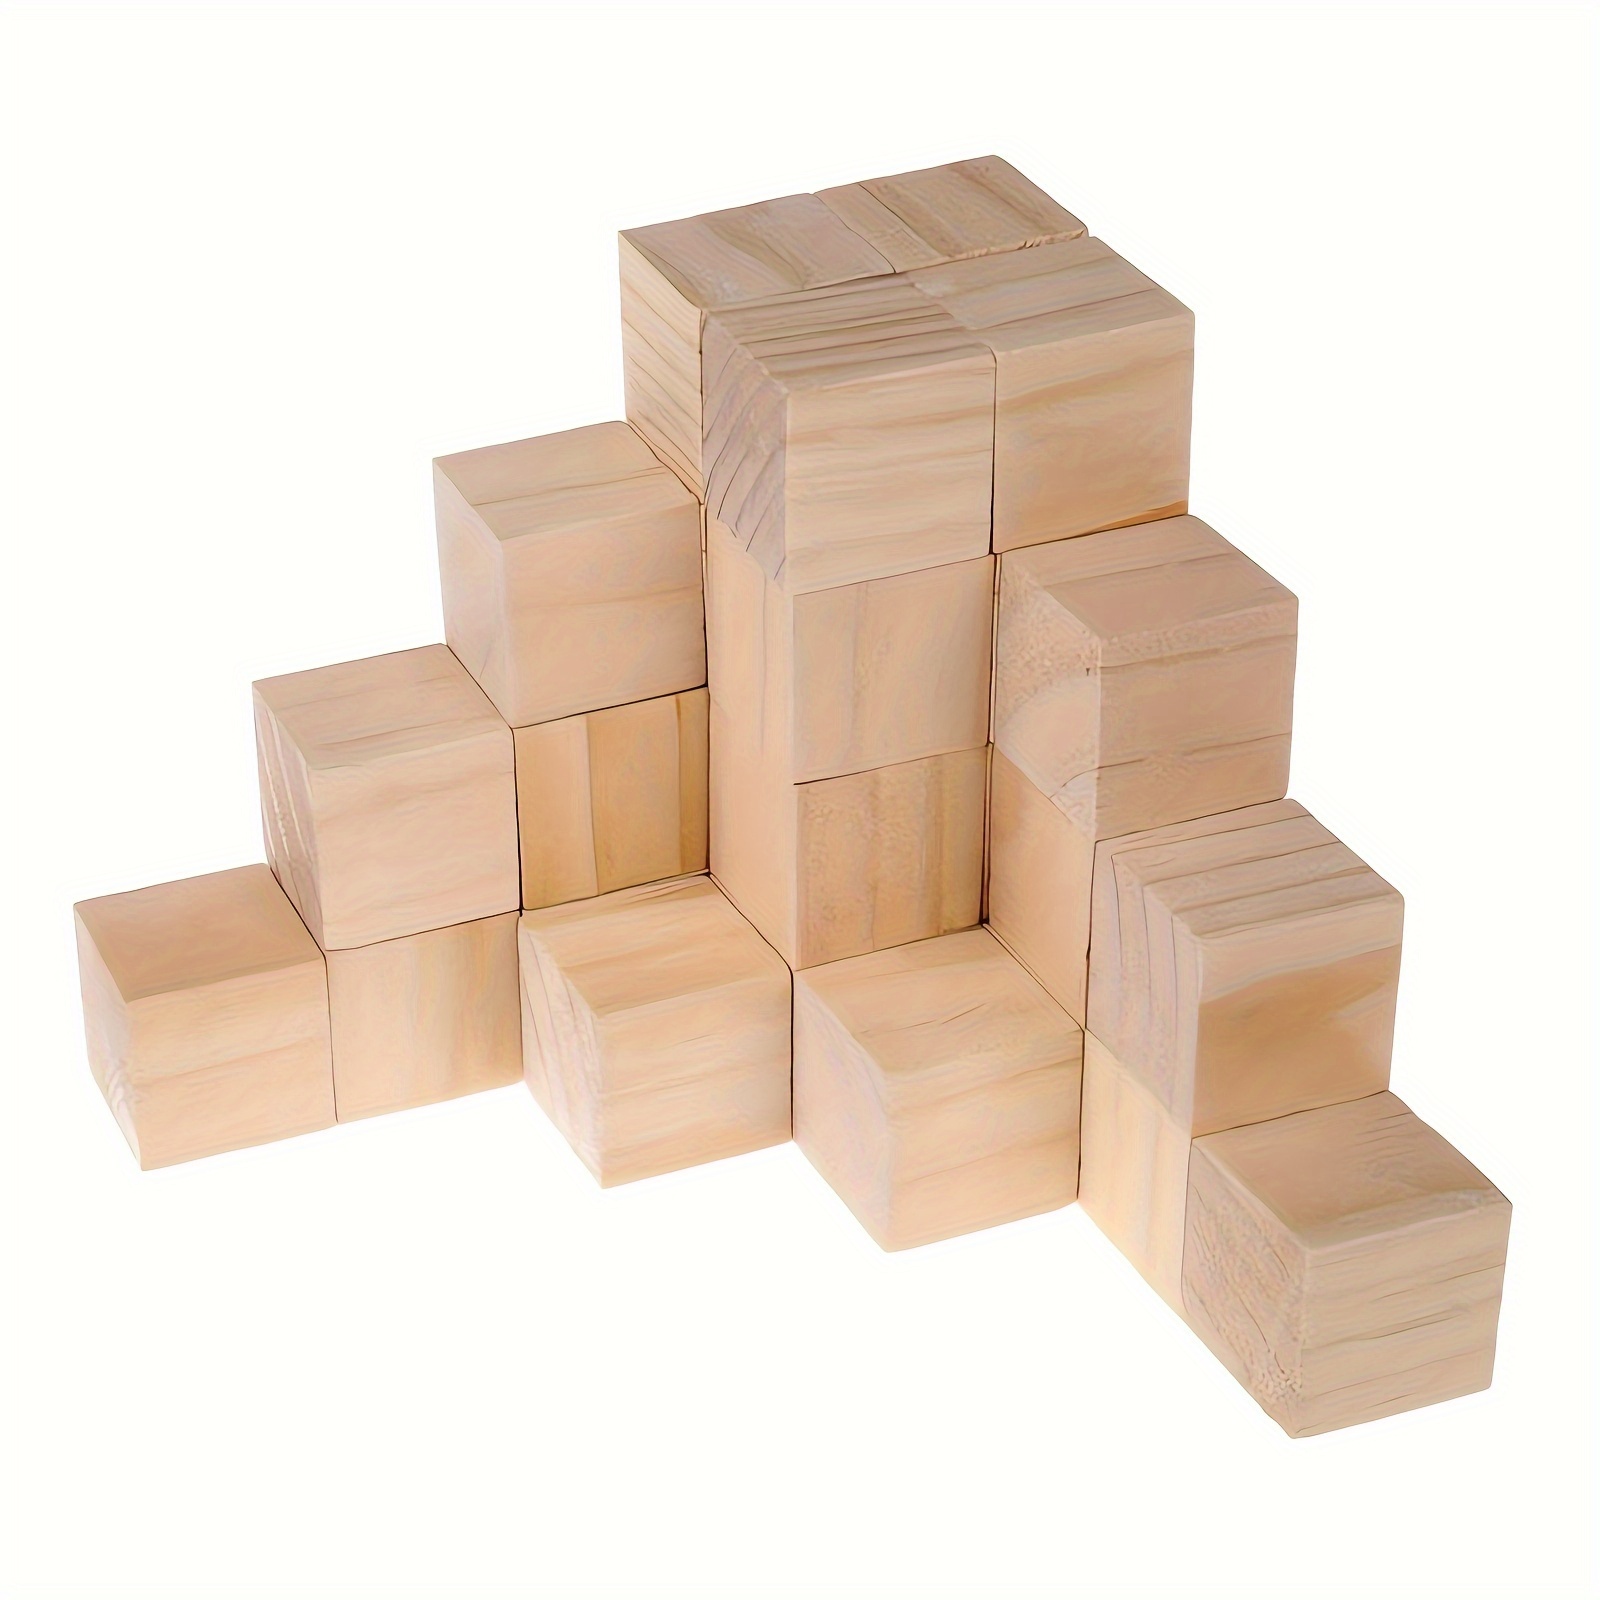 Wooden Cubes 1cm Small Wood Blocks for Crafts 2/5 inch Unfinished Natural  Wood Square Block for DIY Projects and Puzzle Making (260PCS)